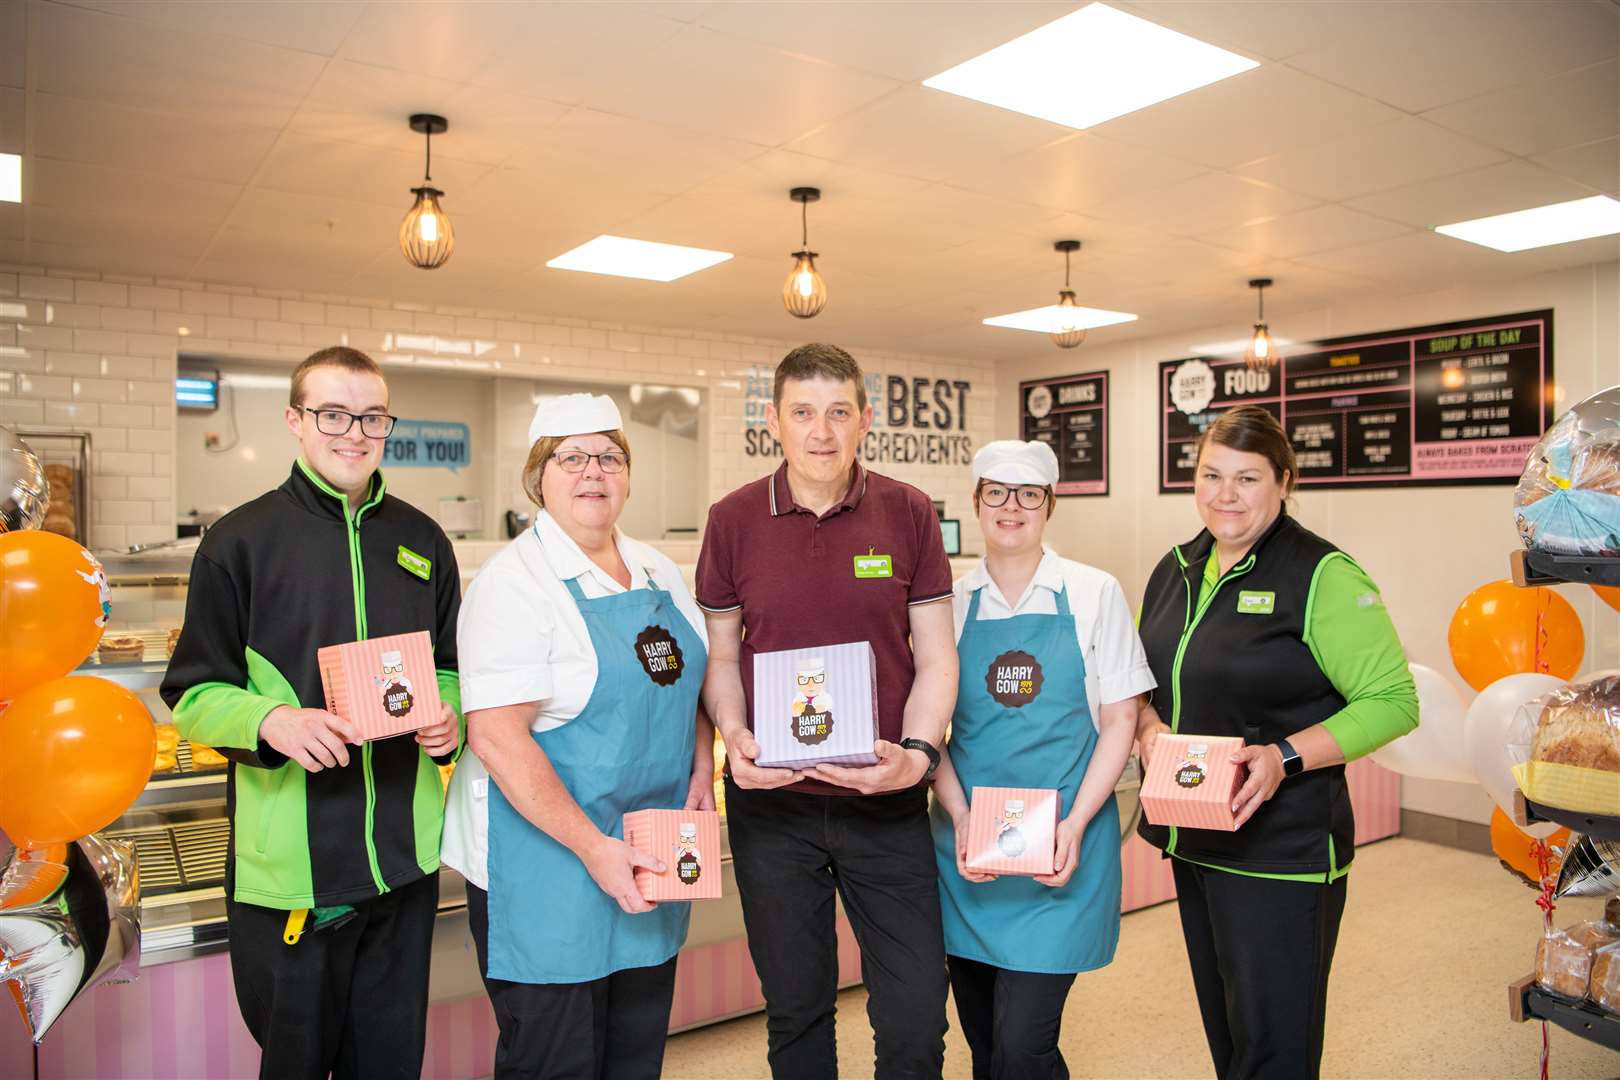 Harry Gow has opened a new shop in Asda Elgin. From left, Craig Main, Asda; Morag Mackenzie, Harry Gow; Les Tyson, Operations Manager, Asda; Nicola Ewen, Manager, Harry Gow; and Diane Stephens, Asda.